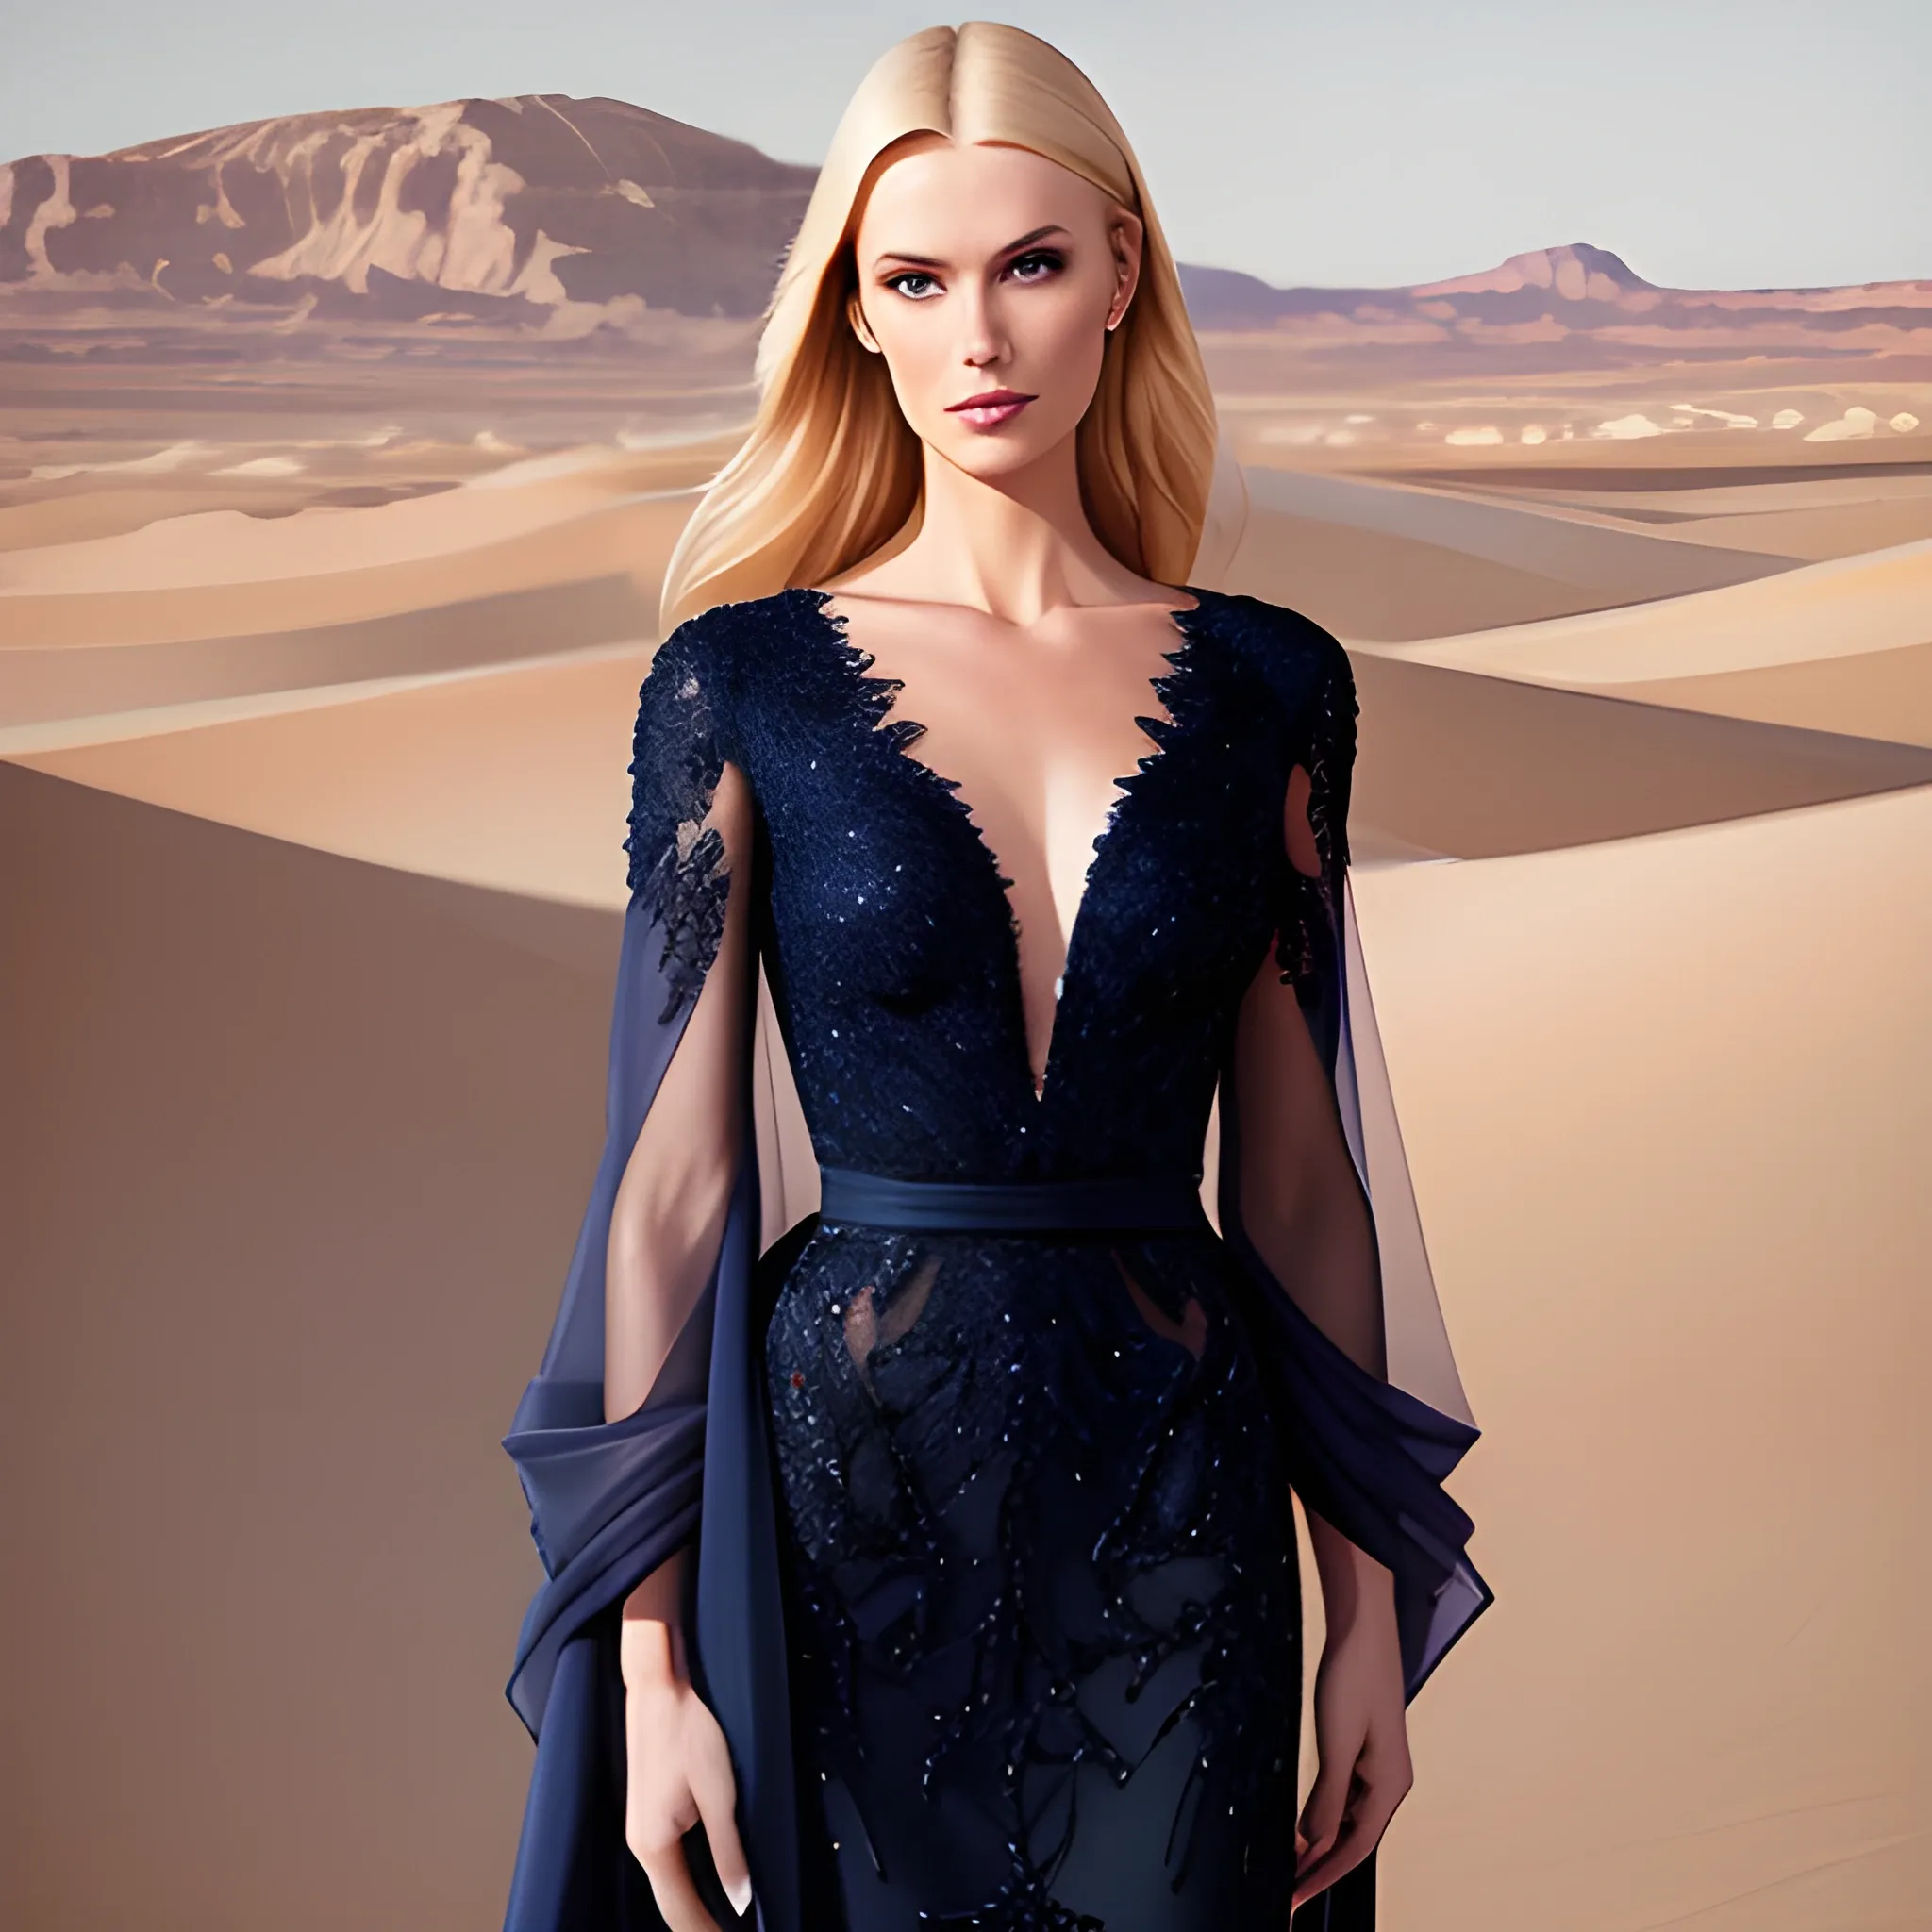 beautiful girl fair, blonde.  wearing a Navy blue Elie Saab garment, with minimal accessory in the middle of the desert. 

realistic, photograph, portrait 